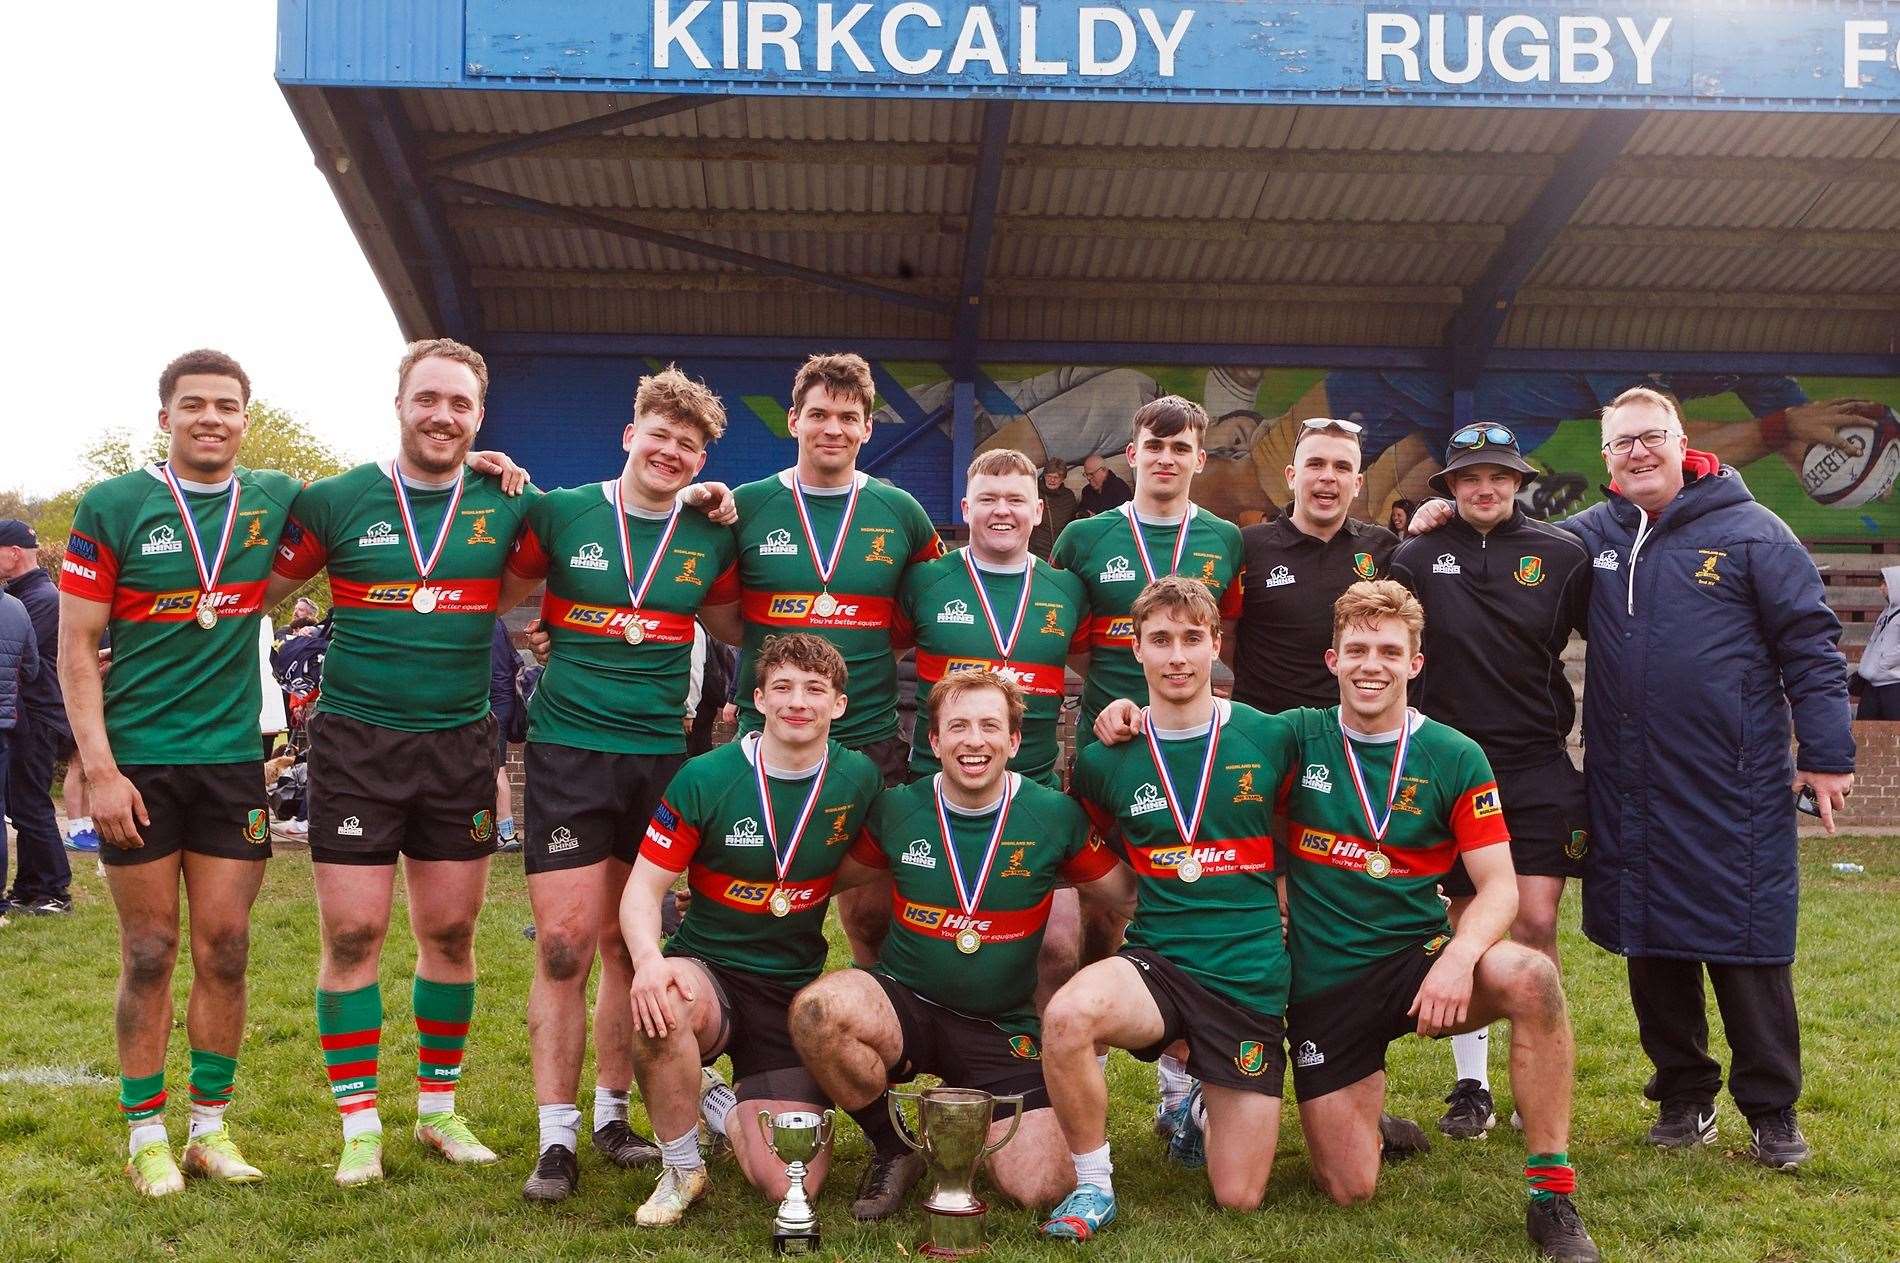 Highland won the Kirkcaldy Sevens with Hugo Crusn named player of the tournament. Picture: Michael Booth/Kirkcaldy Rugby Club